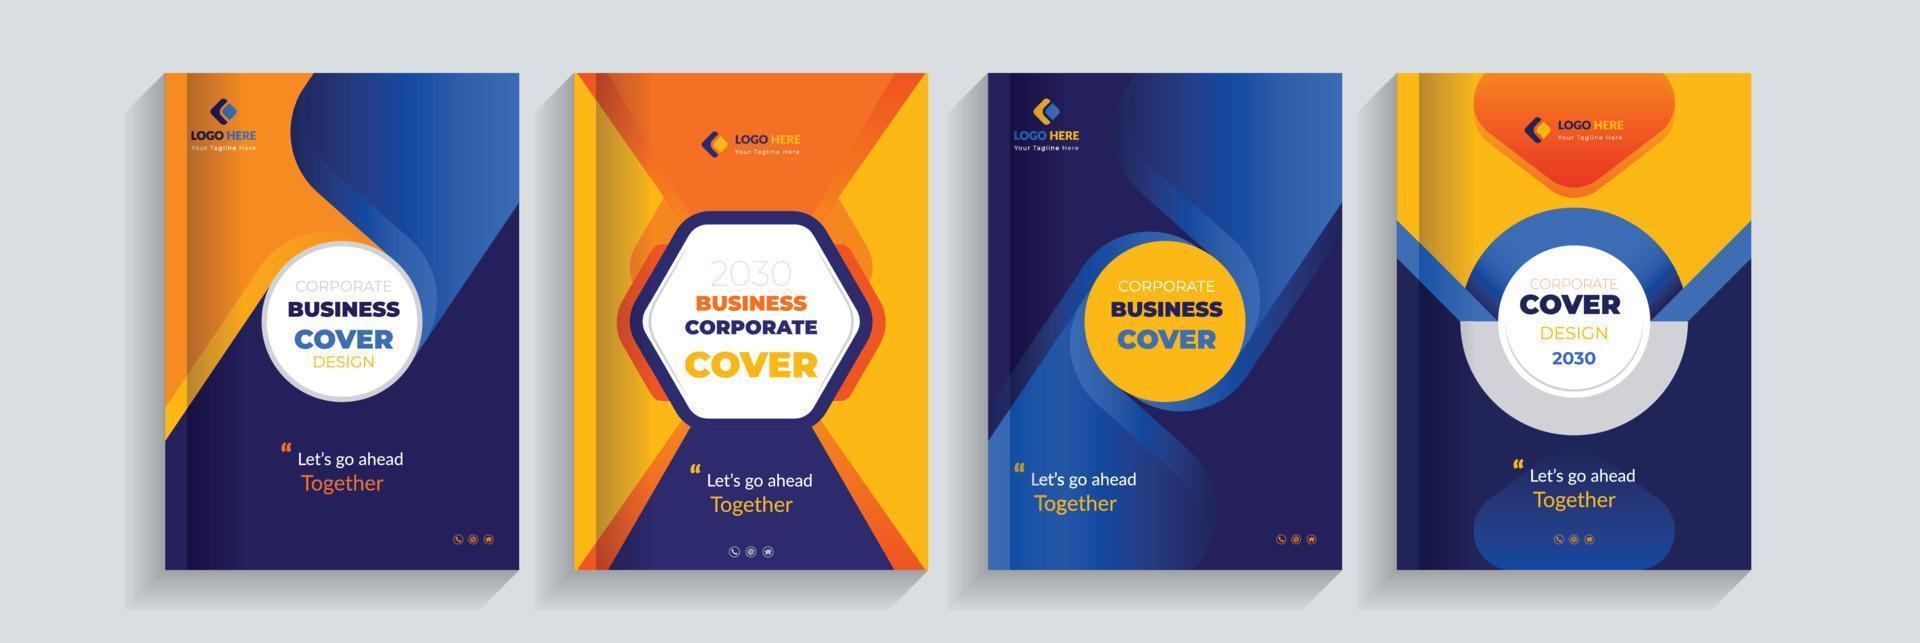 Corporate Cover Design Template Concept adept for multipurpose Projects vector